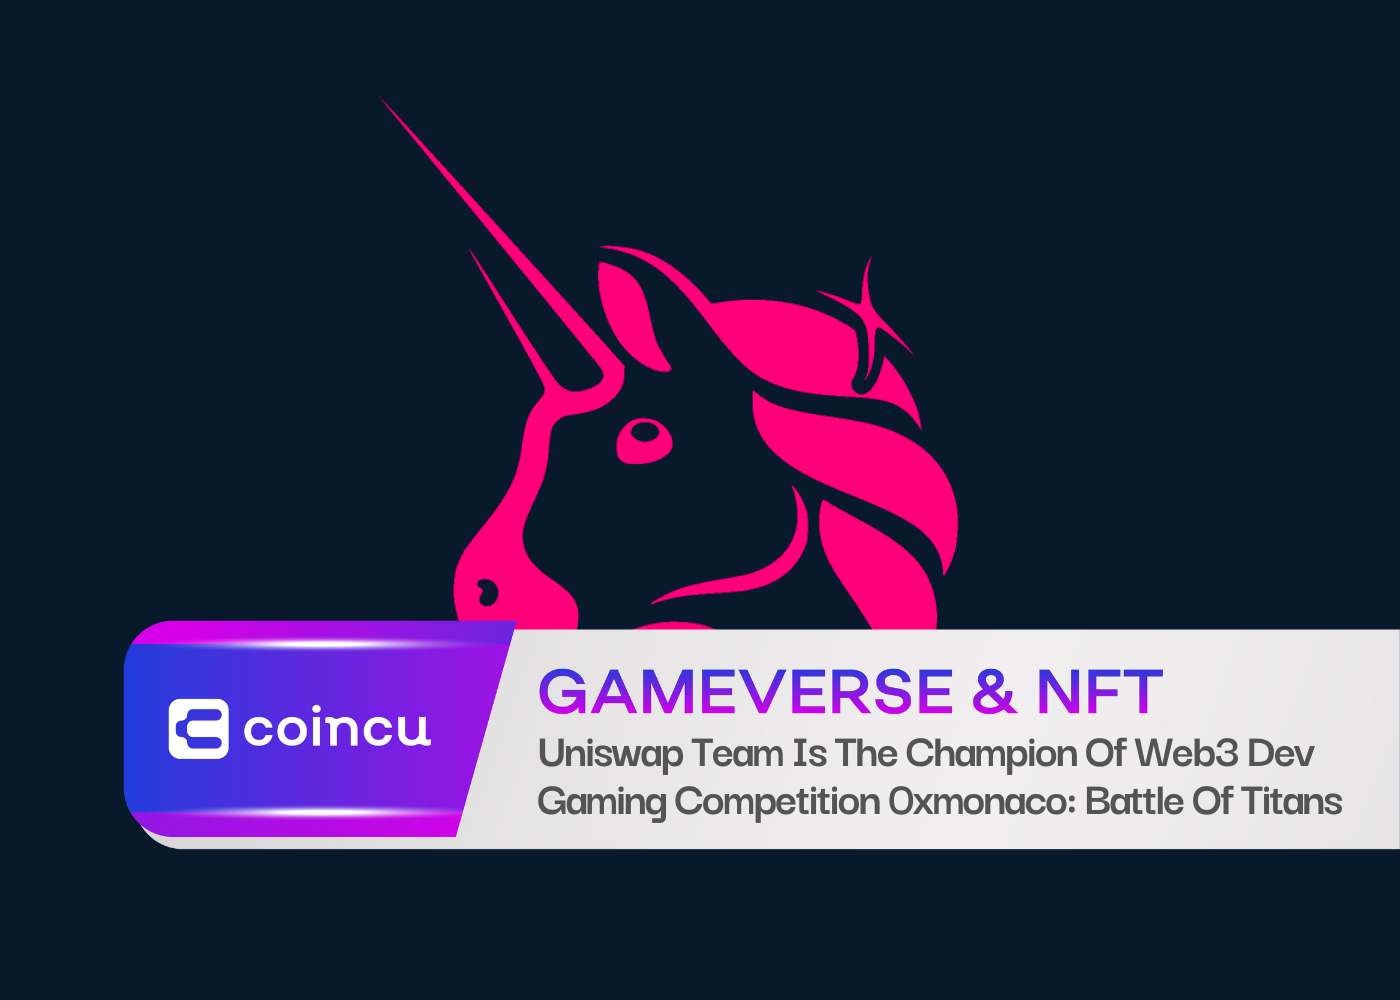 Uniswap Team Is The Champion Of Web3 Dev Gaming Competition 0xmonaco: Battle Of Titans